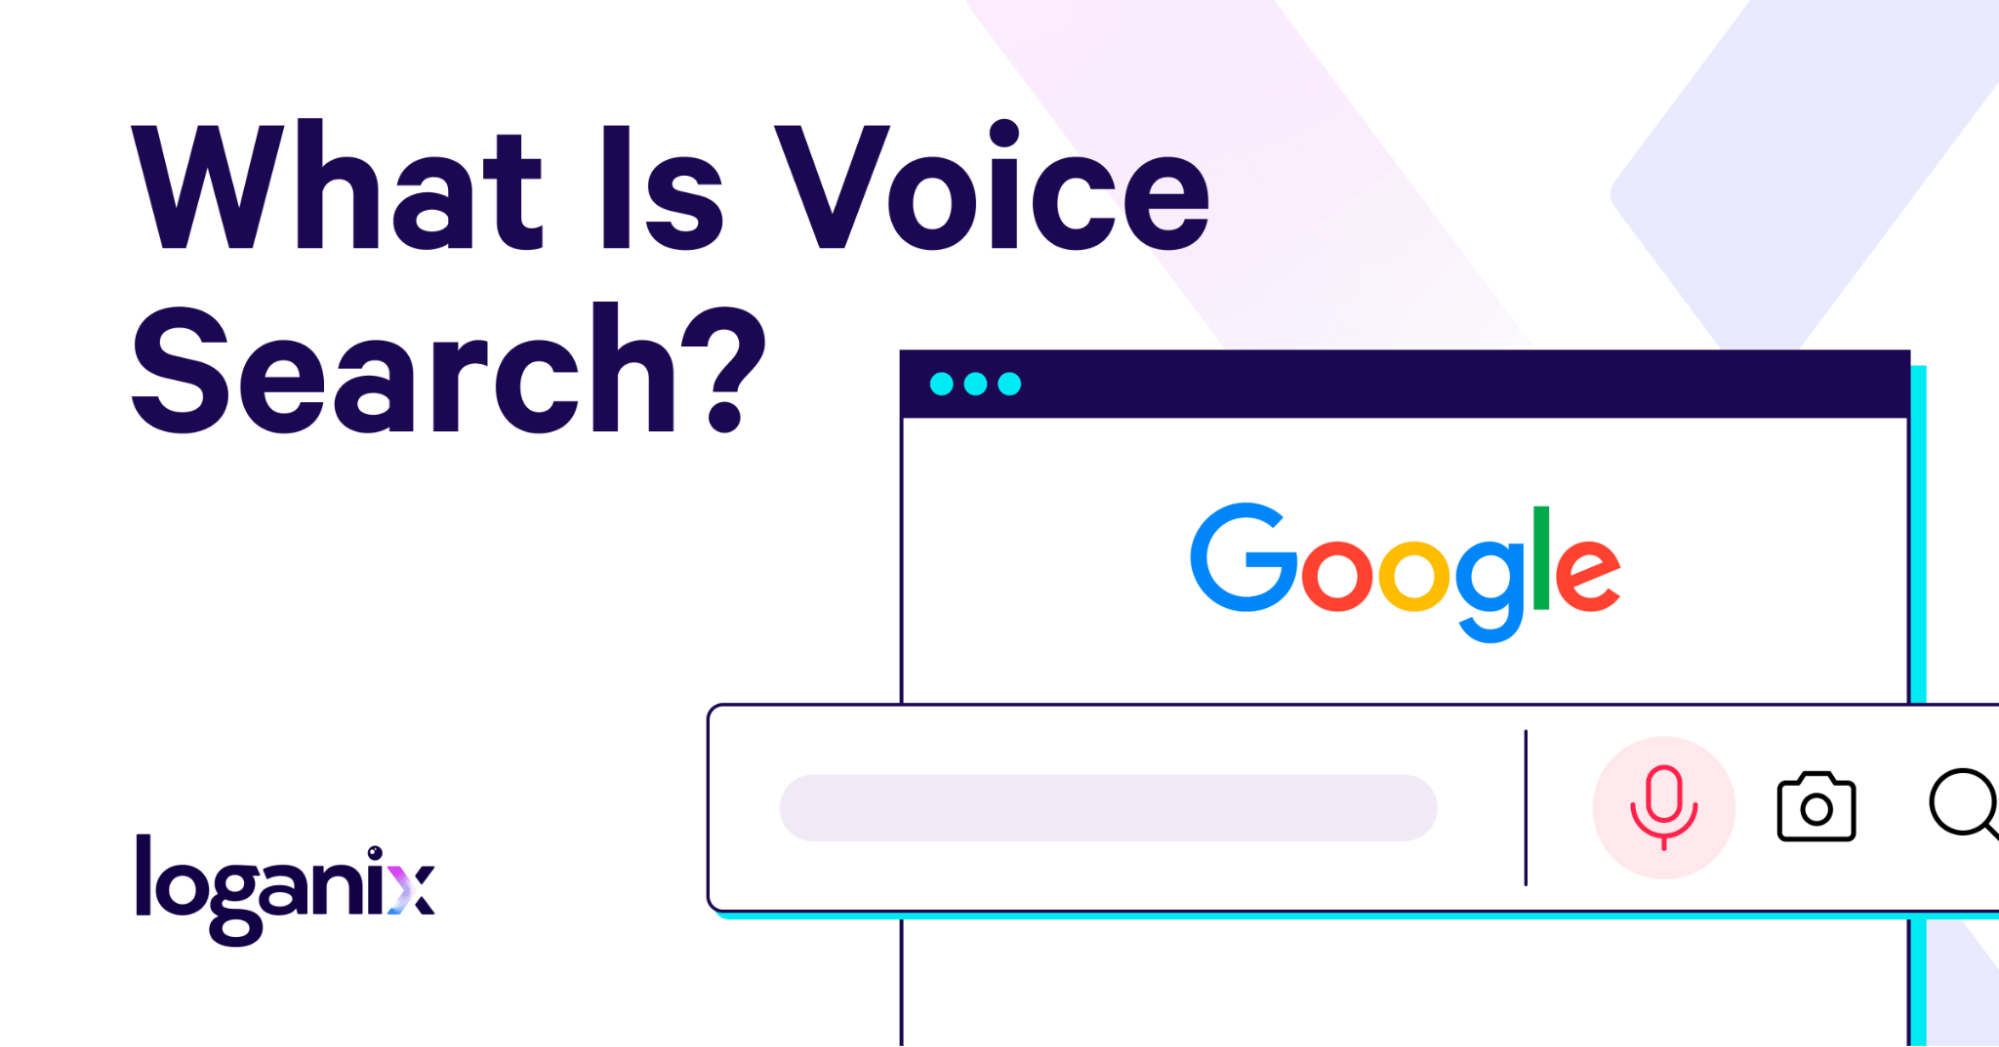 What Is Voice Search?